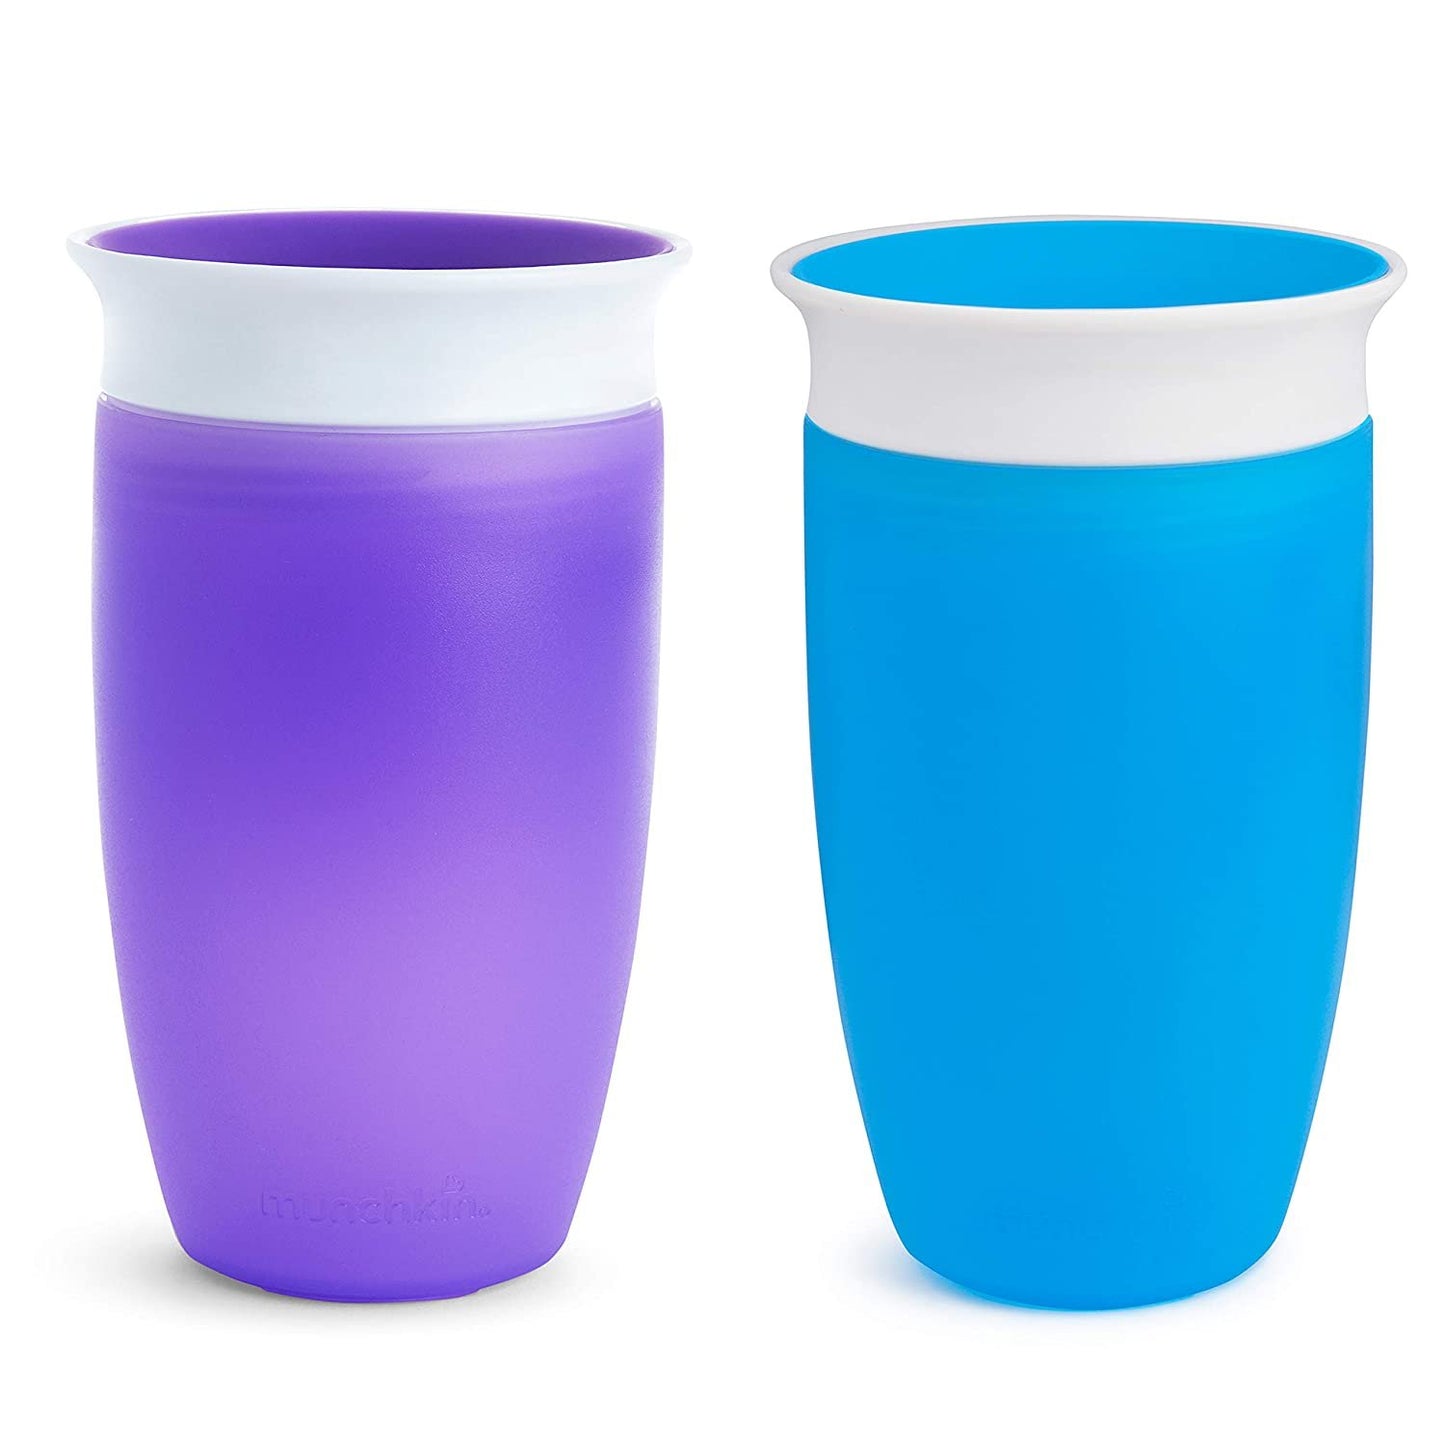 Munchkin Miracle 360 Degree Sippy Cup, 10oz, Blue/Green, 2 Pack